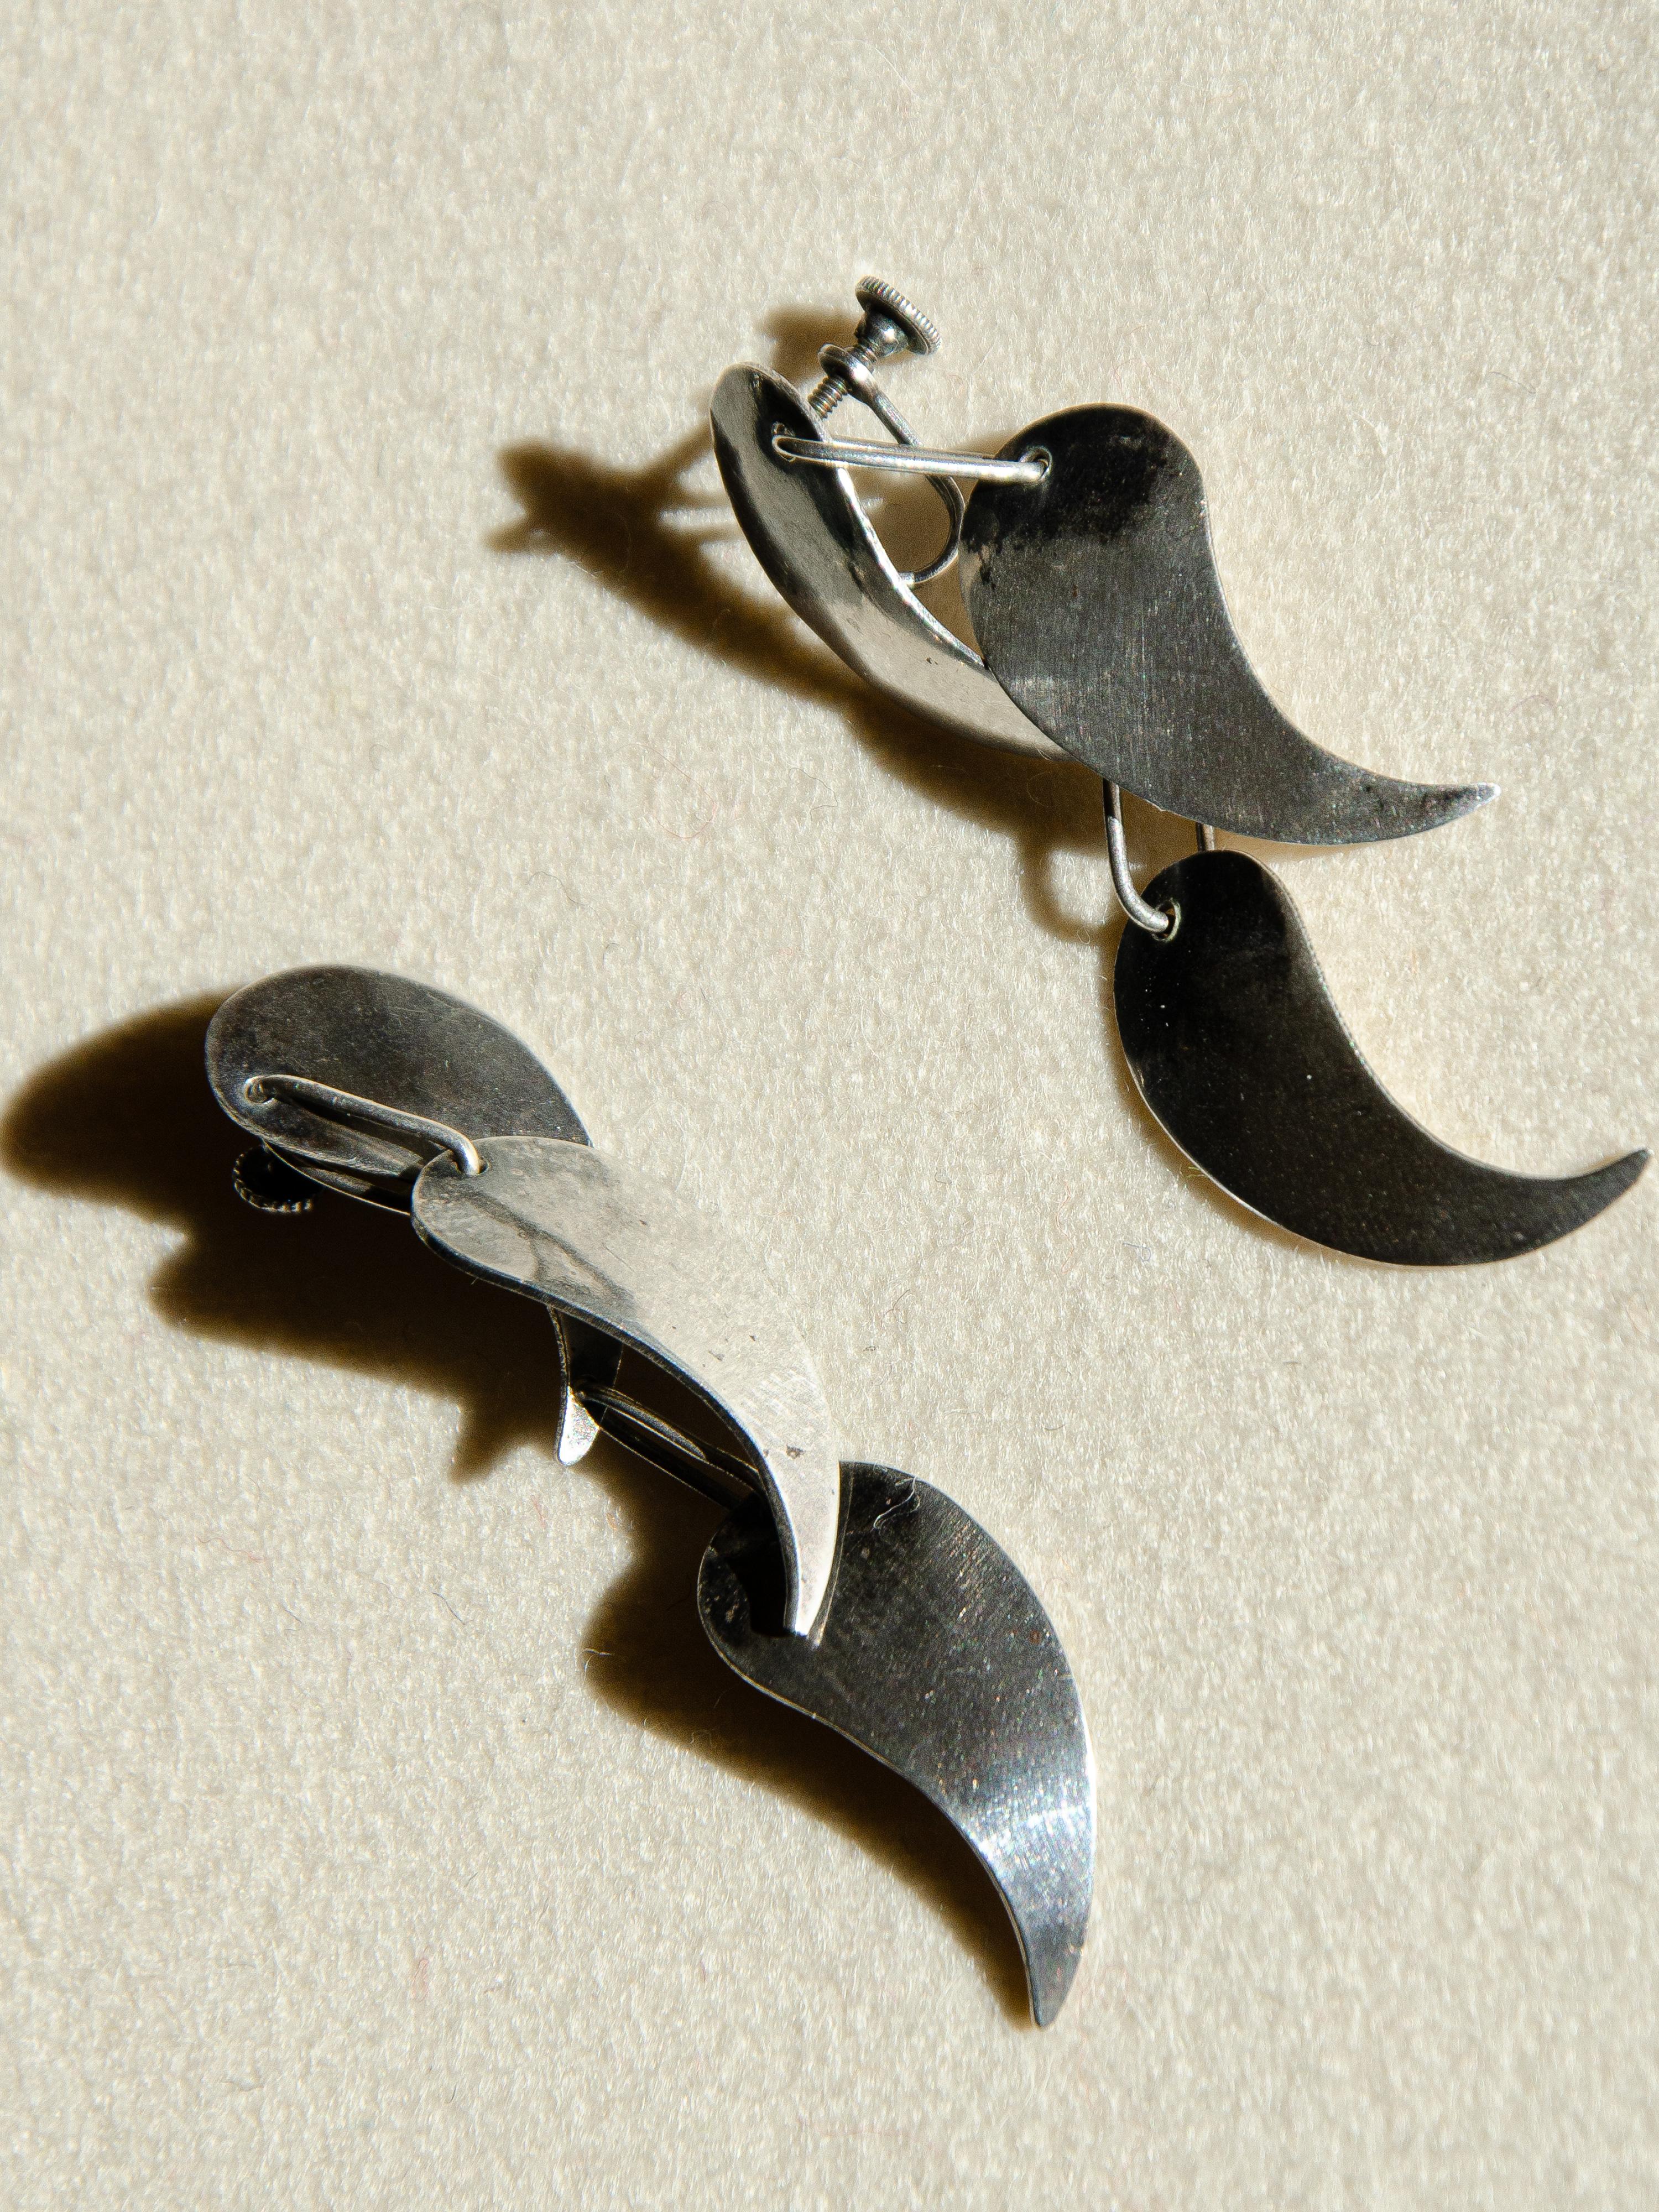 Exceptional and rare sterling silver petal earrings designed by Greenwich Village modernist jeweler Art Smith in the 1950's. Smith is considered a master jewelers during the modernist movement of the mid-twentieth century. 

Fusing eclectic